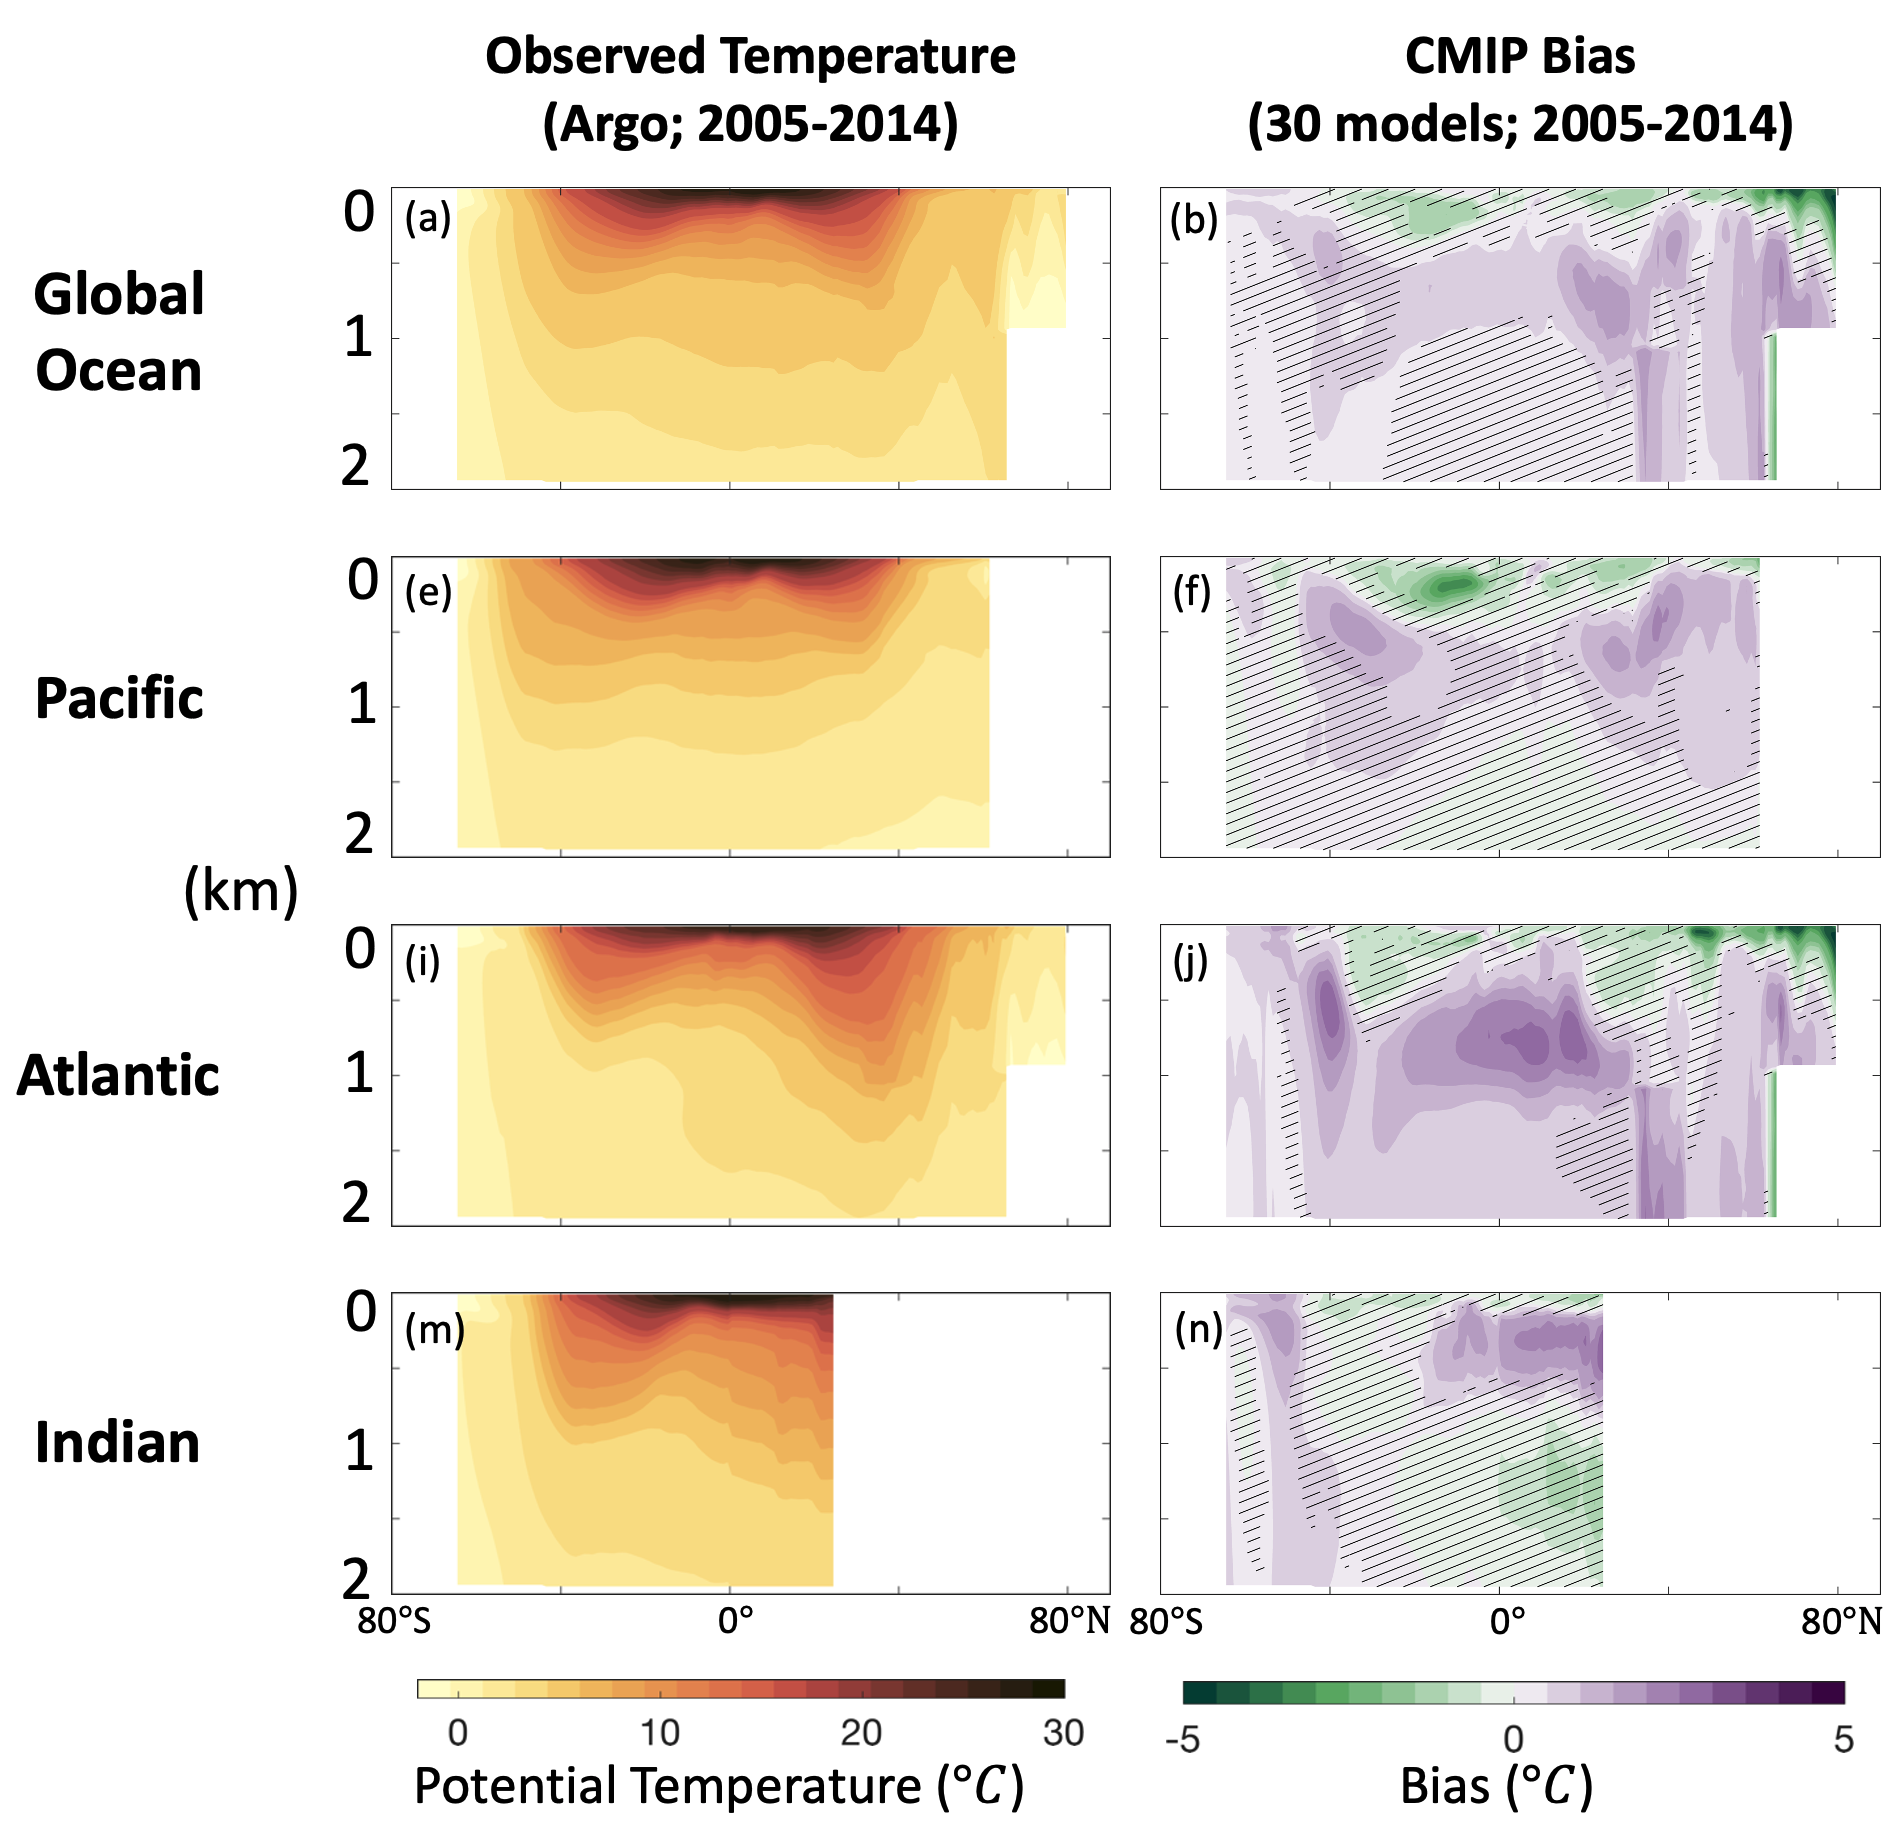 Sections of zonally averaged temperature from observations (left) and multi-model mean bias (right) as a function of latitude (horizontal axis) and depth (vertical axis) in the global ocean (top), Pacific (second from top), Atlantic (third from top) and Indian (bottom).